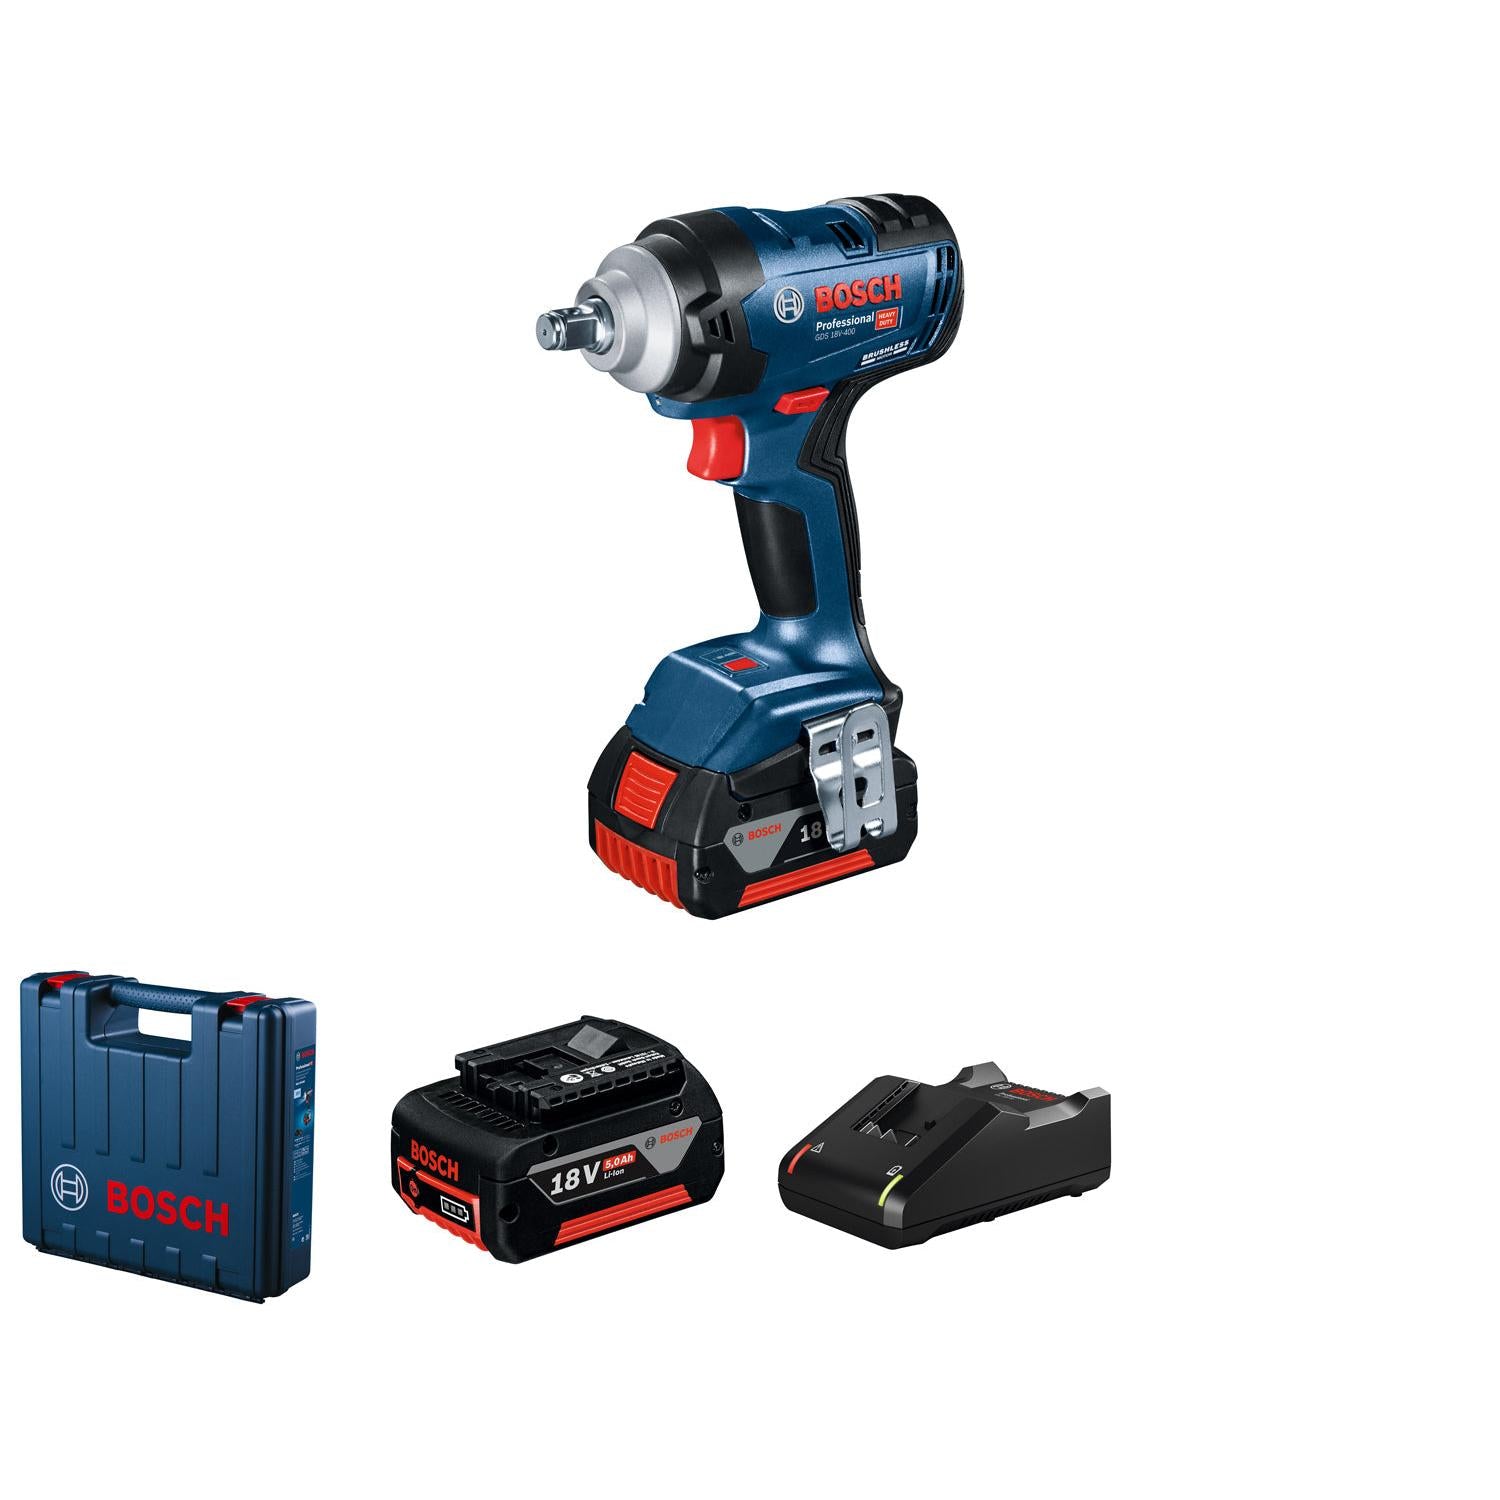 Bosch Professional Cordless Impact Wrench GDS 18V-400 06019K0020 Power Tool Services